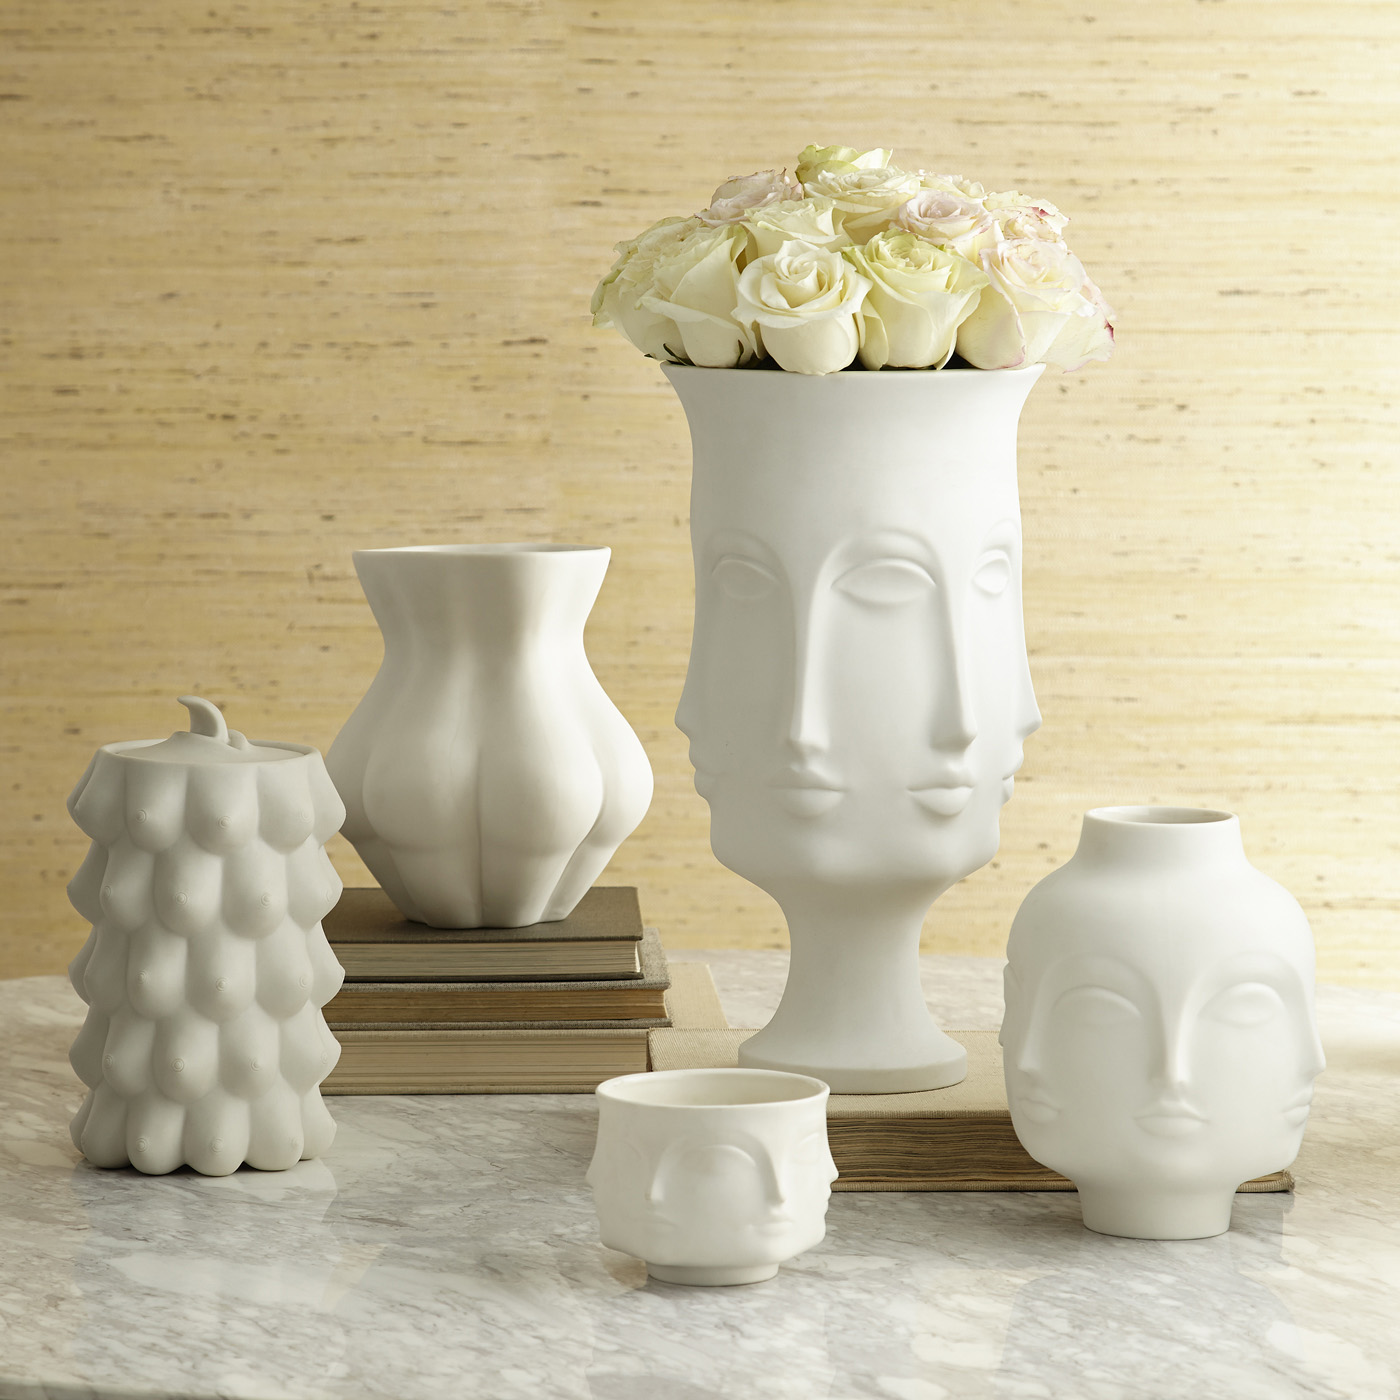 vases inspired by the human form